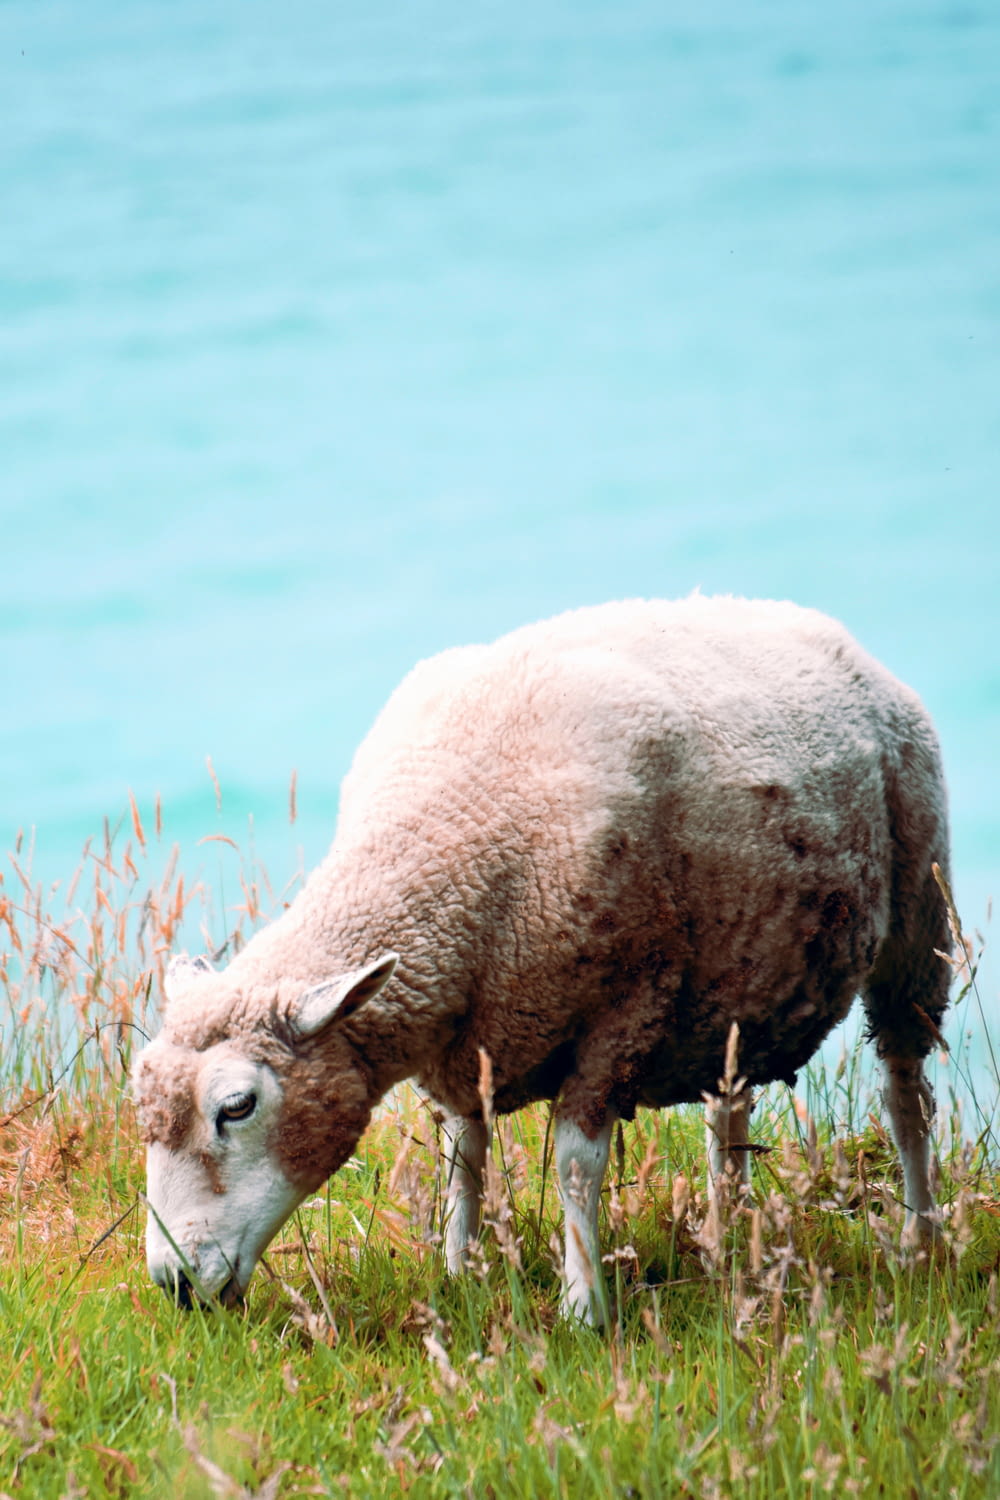 white sheep on green grass near body of water during daytime